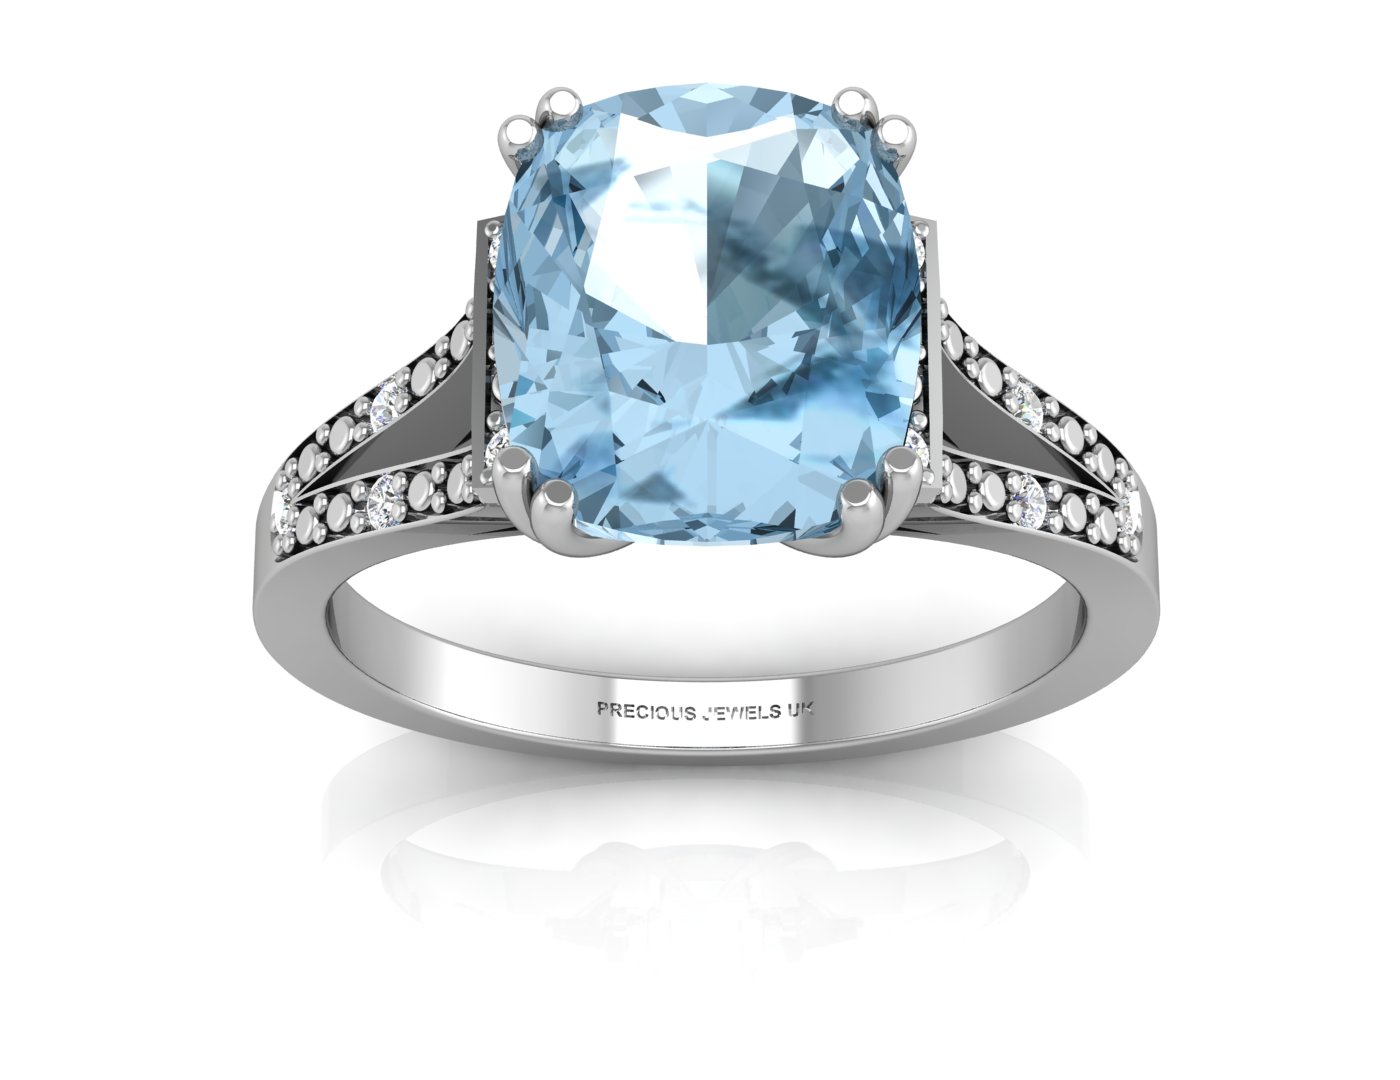 9ct White Gold Diamond And Blue Topaz Ring 0.07 Carats - Image 3 of 5